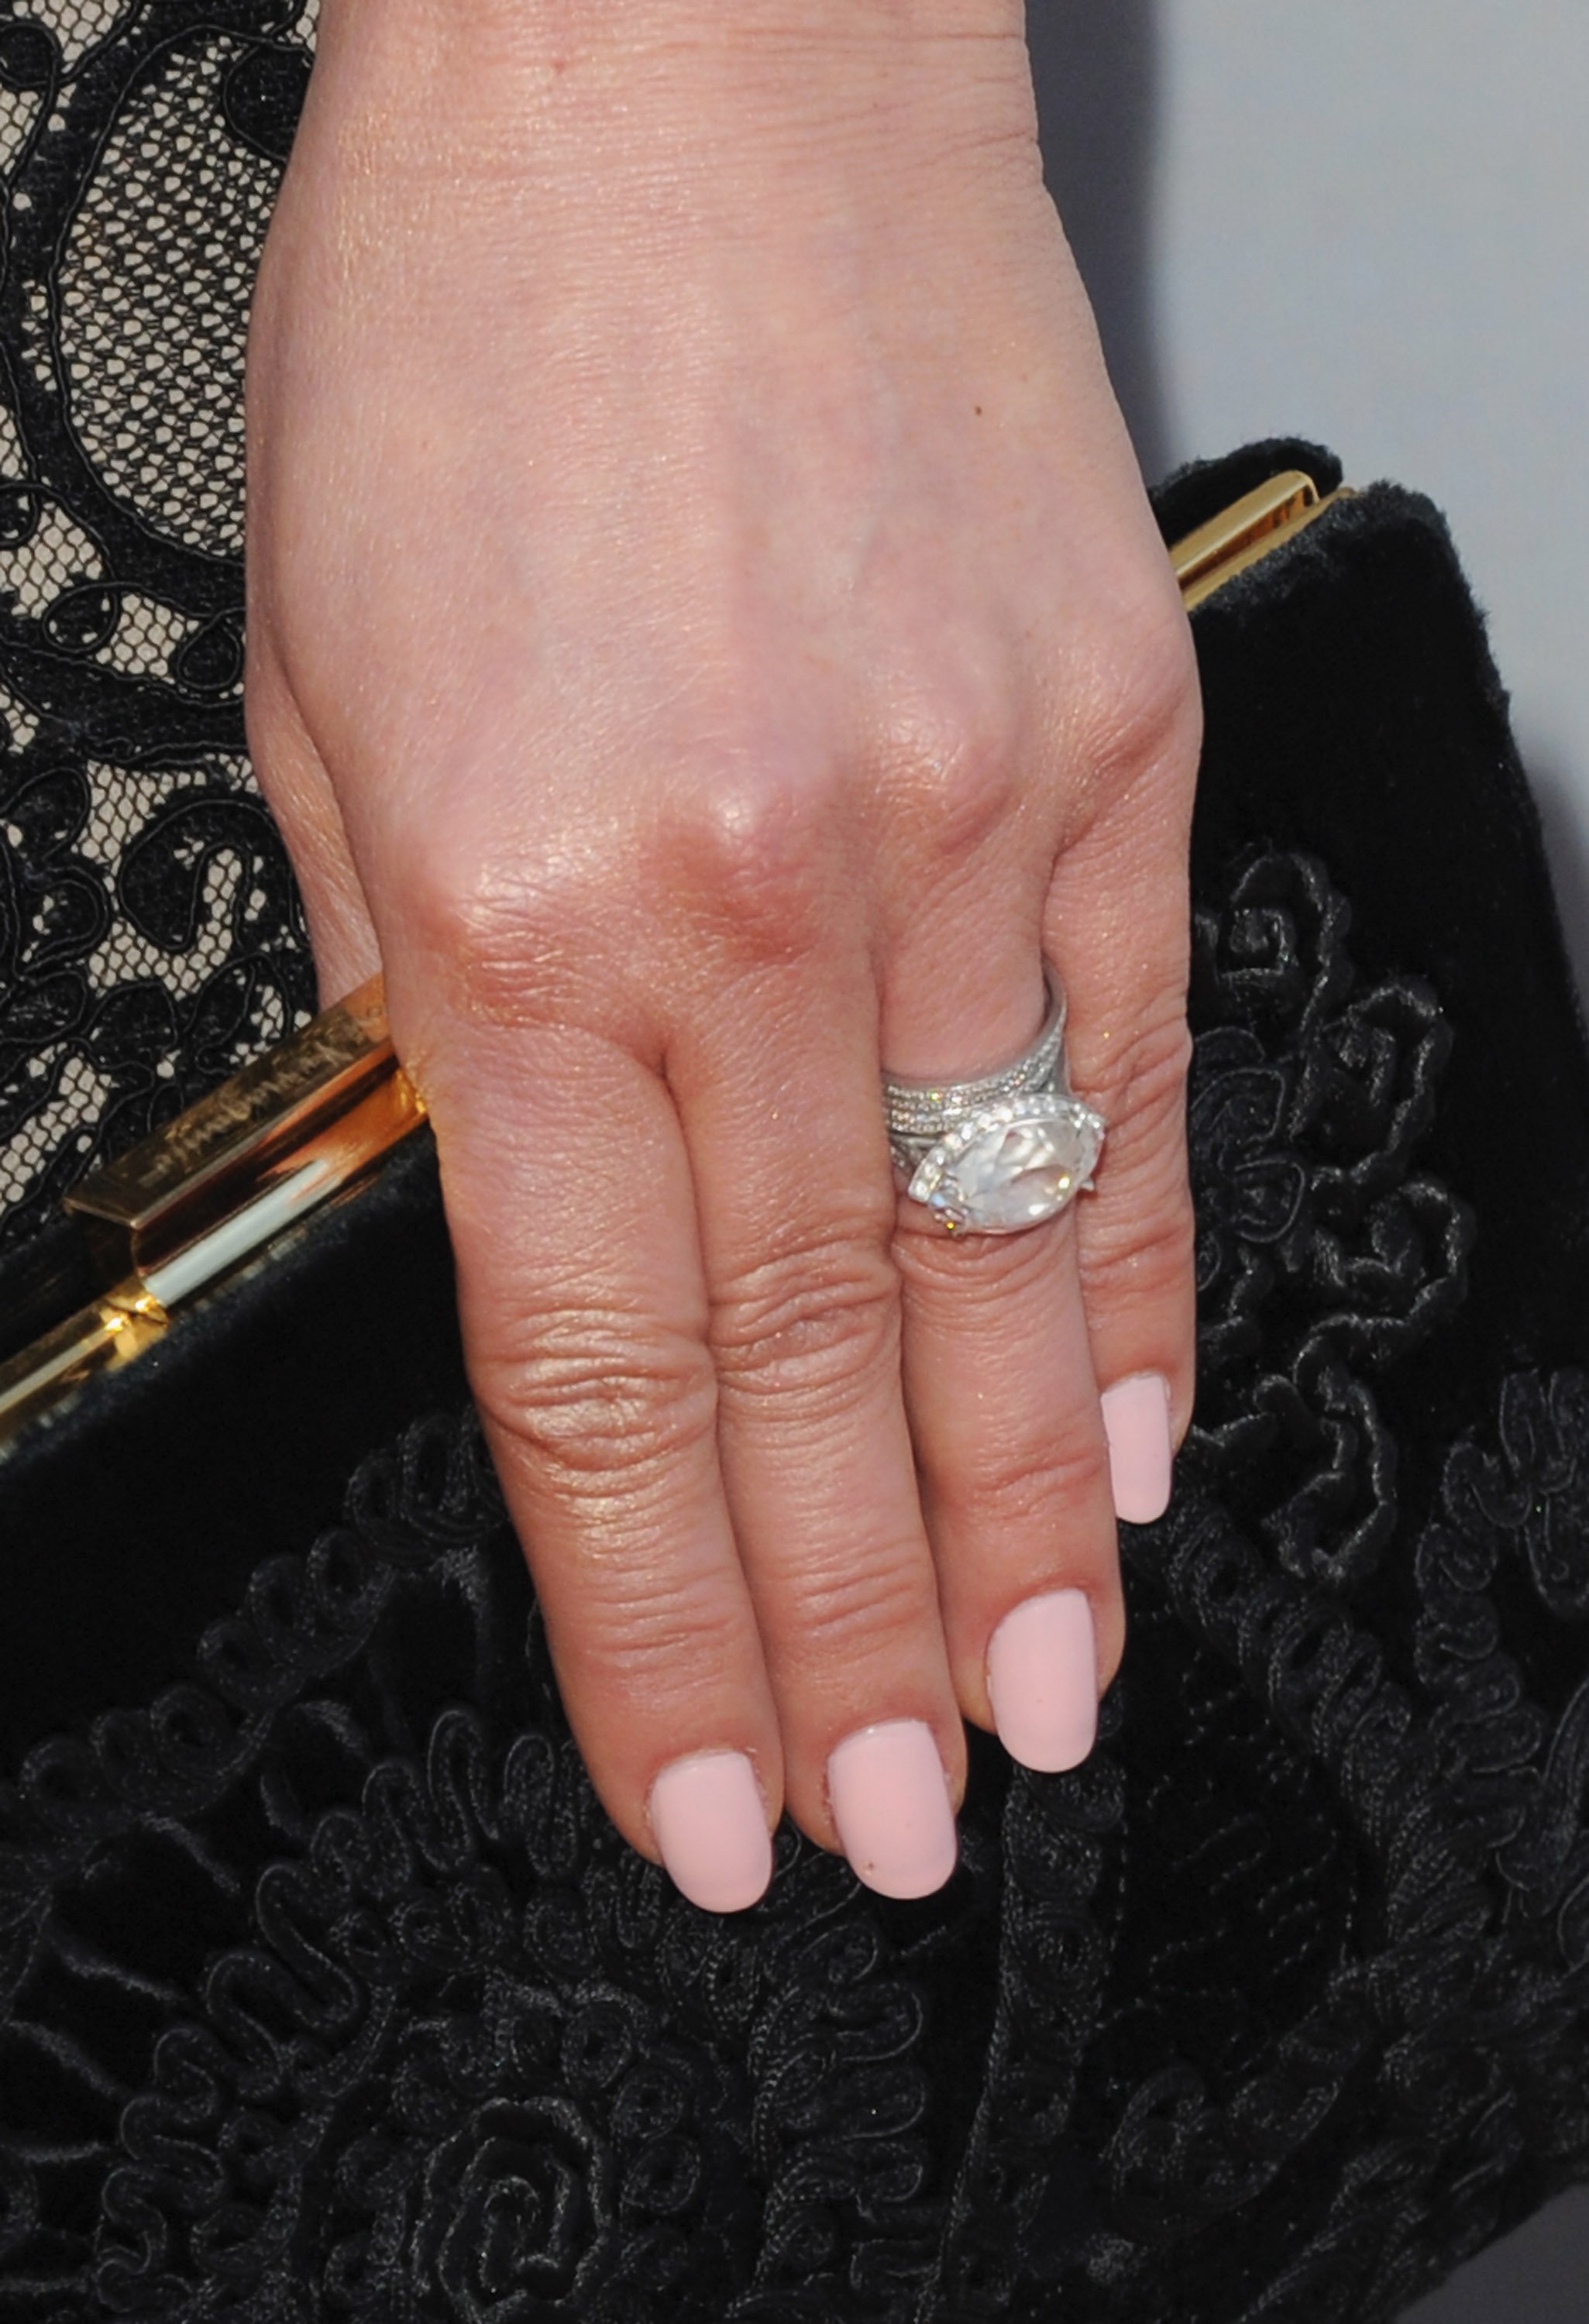 Catherine Zeta-Jones' ring at the 2014 AFI Life Achievement Award Gala Tribute on June 5, 2014, in Hollywood | Source: Getty Images